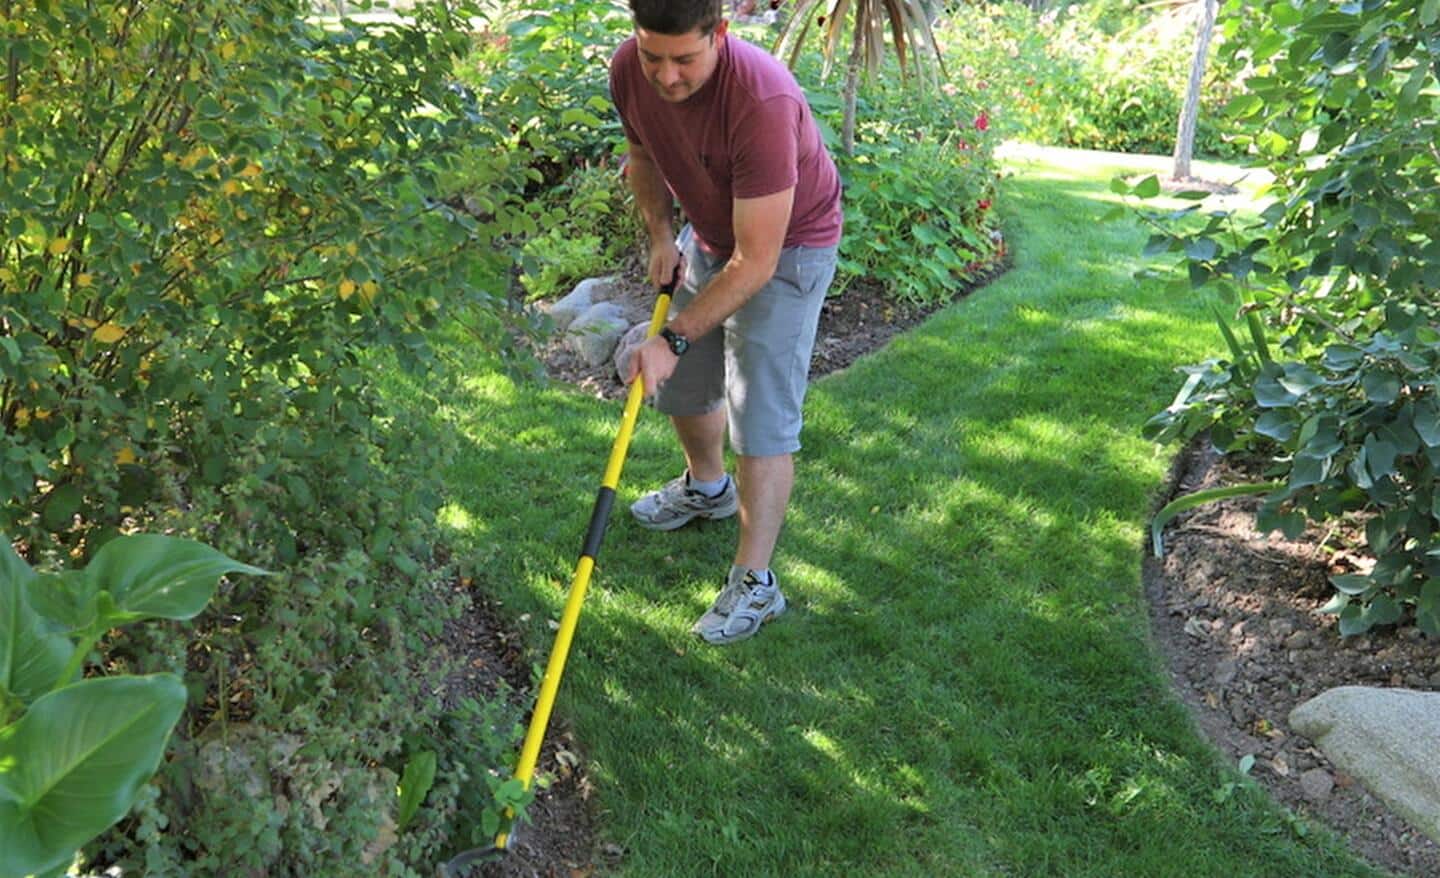 Person uses a weeding tool to clean a garden bed